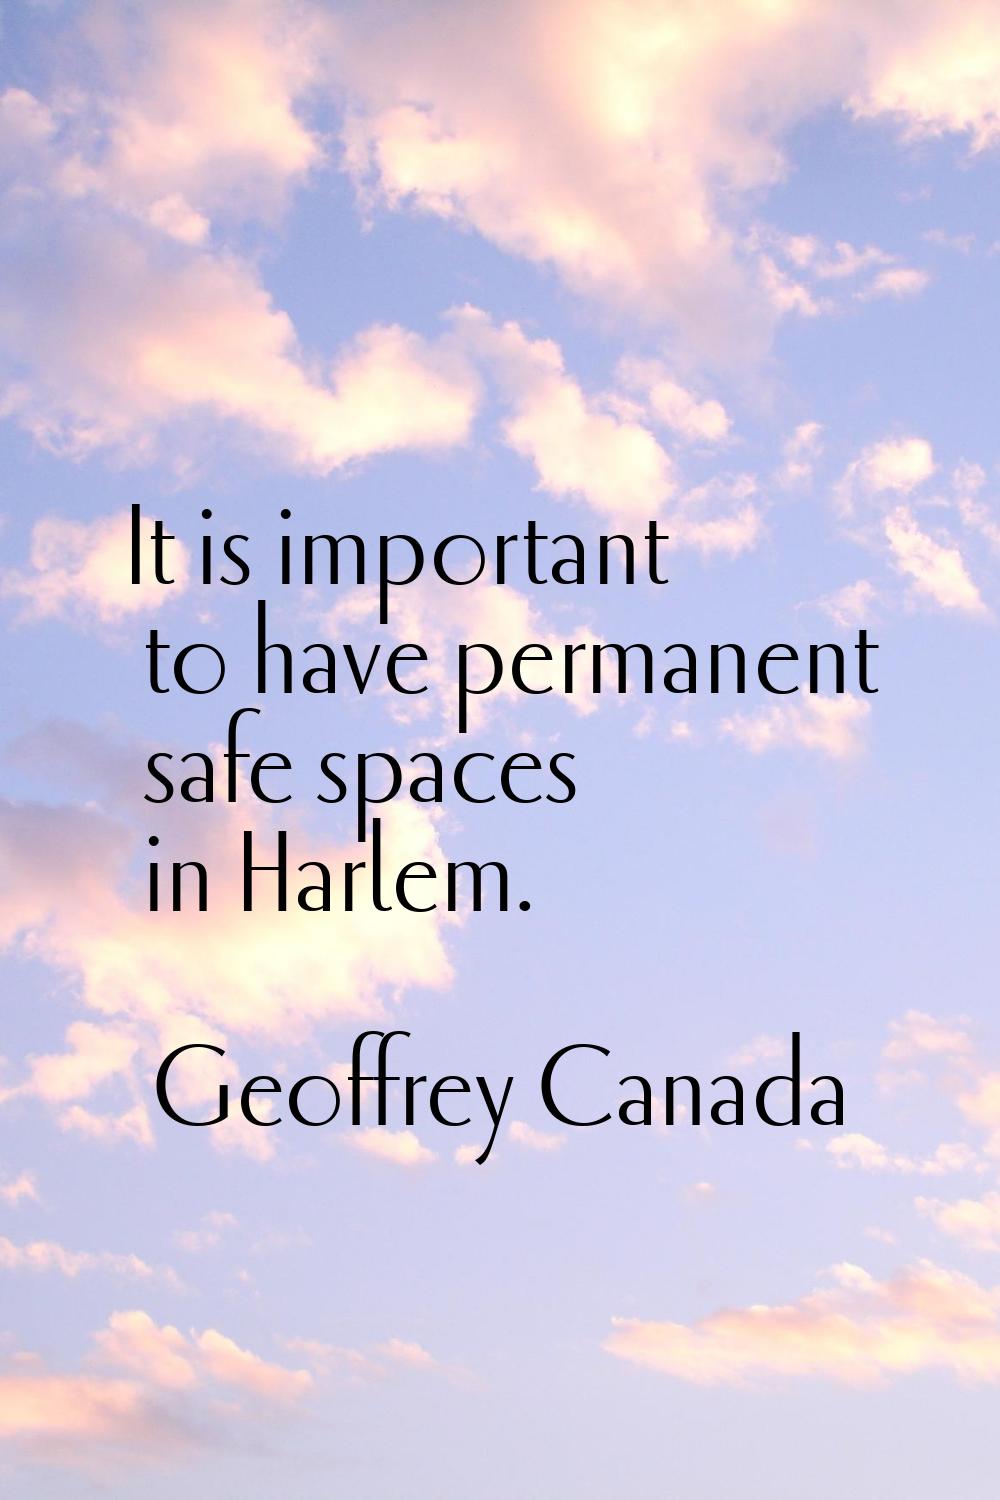 It is important to have permanent safe spaces in Harlem.